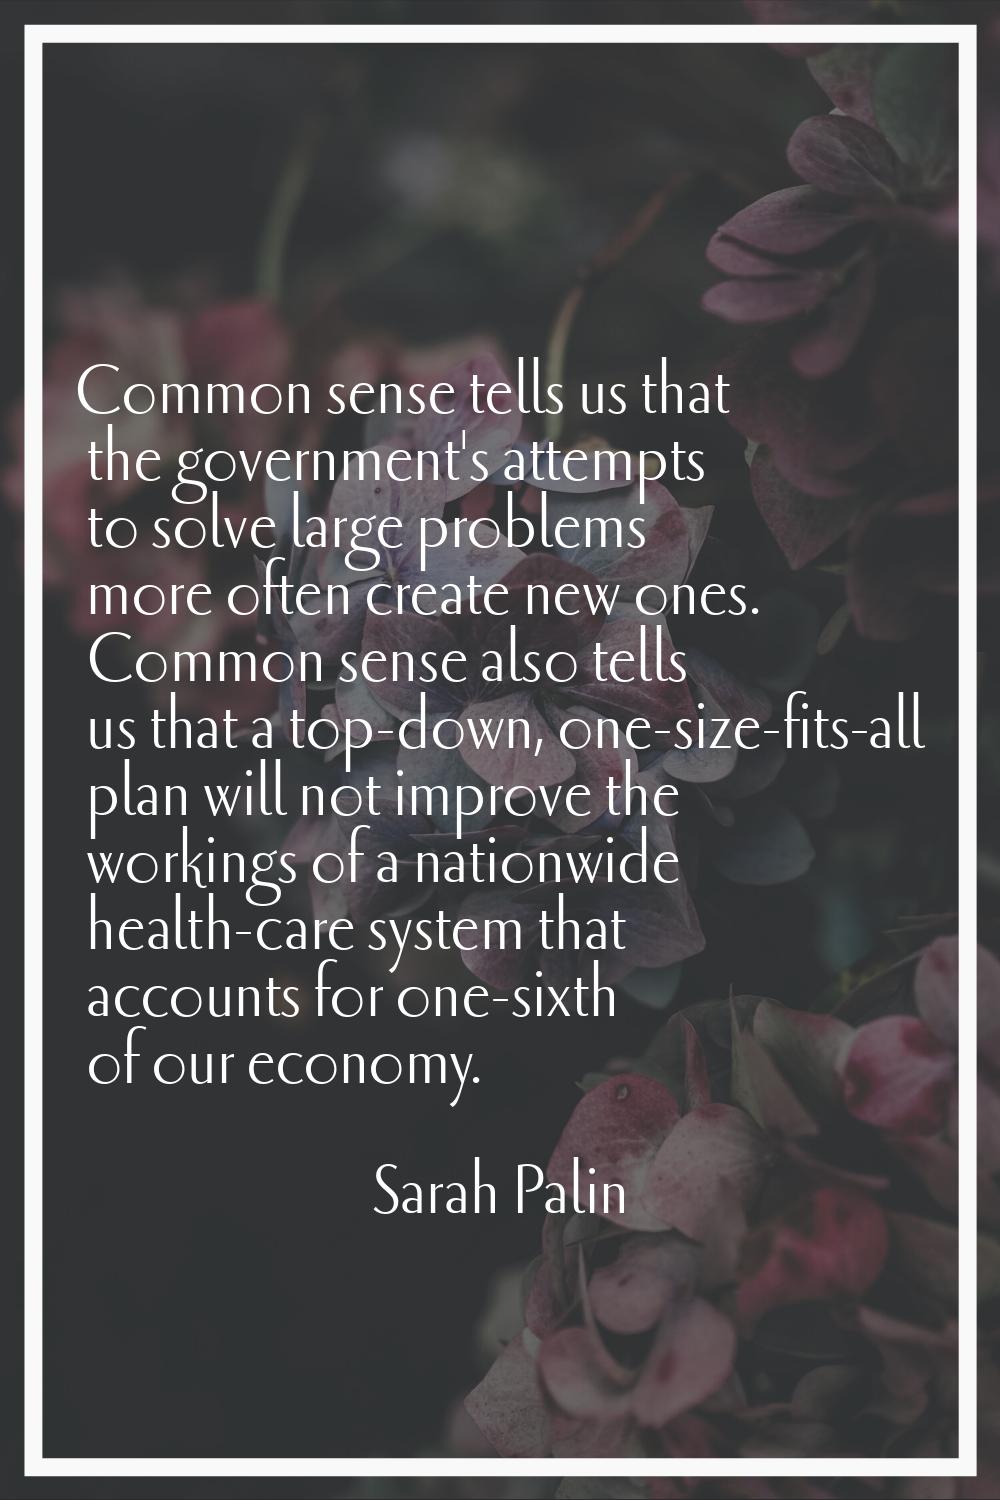 Common sense tells us that the government's attempts to solve large problems more often create new 